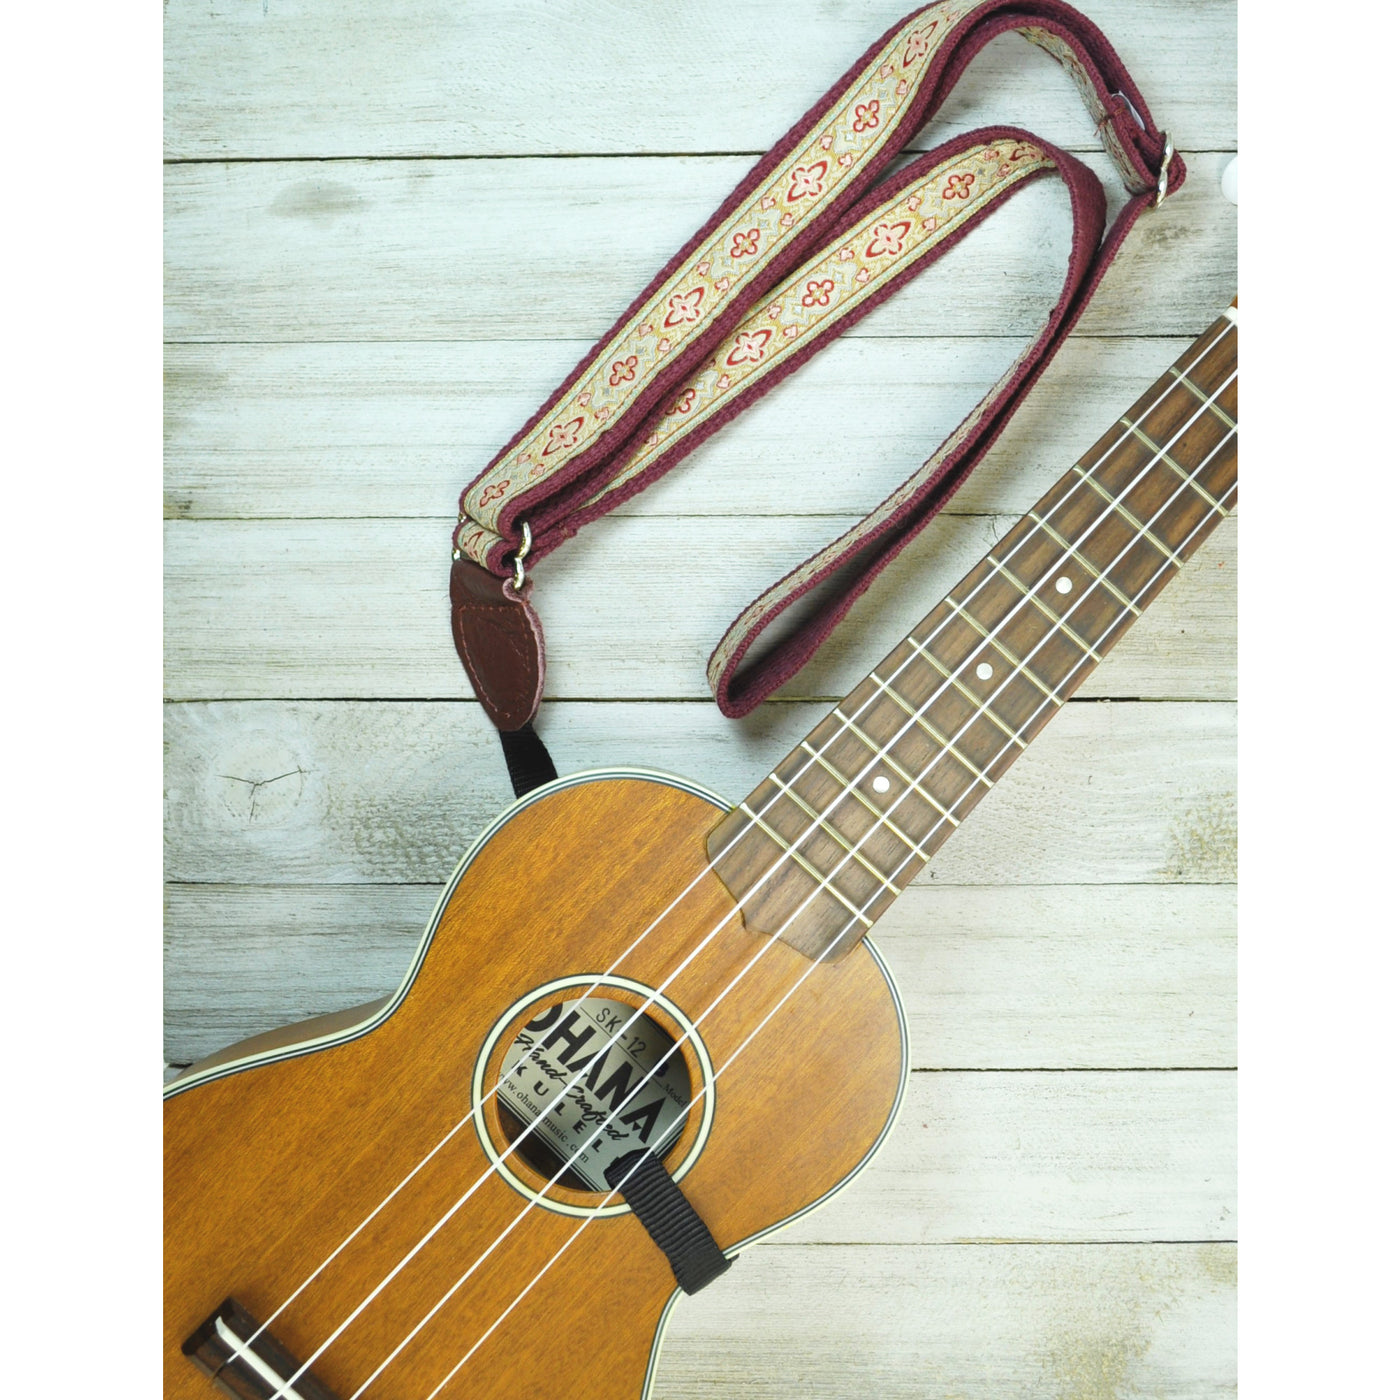 Souldier DUKA1052TQ04BK - Handmade Souldier Fabric Ukulele Straps, 1 Inch Wide and Adjustable up to 55" Made in the USA, Black